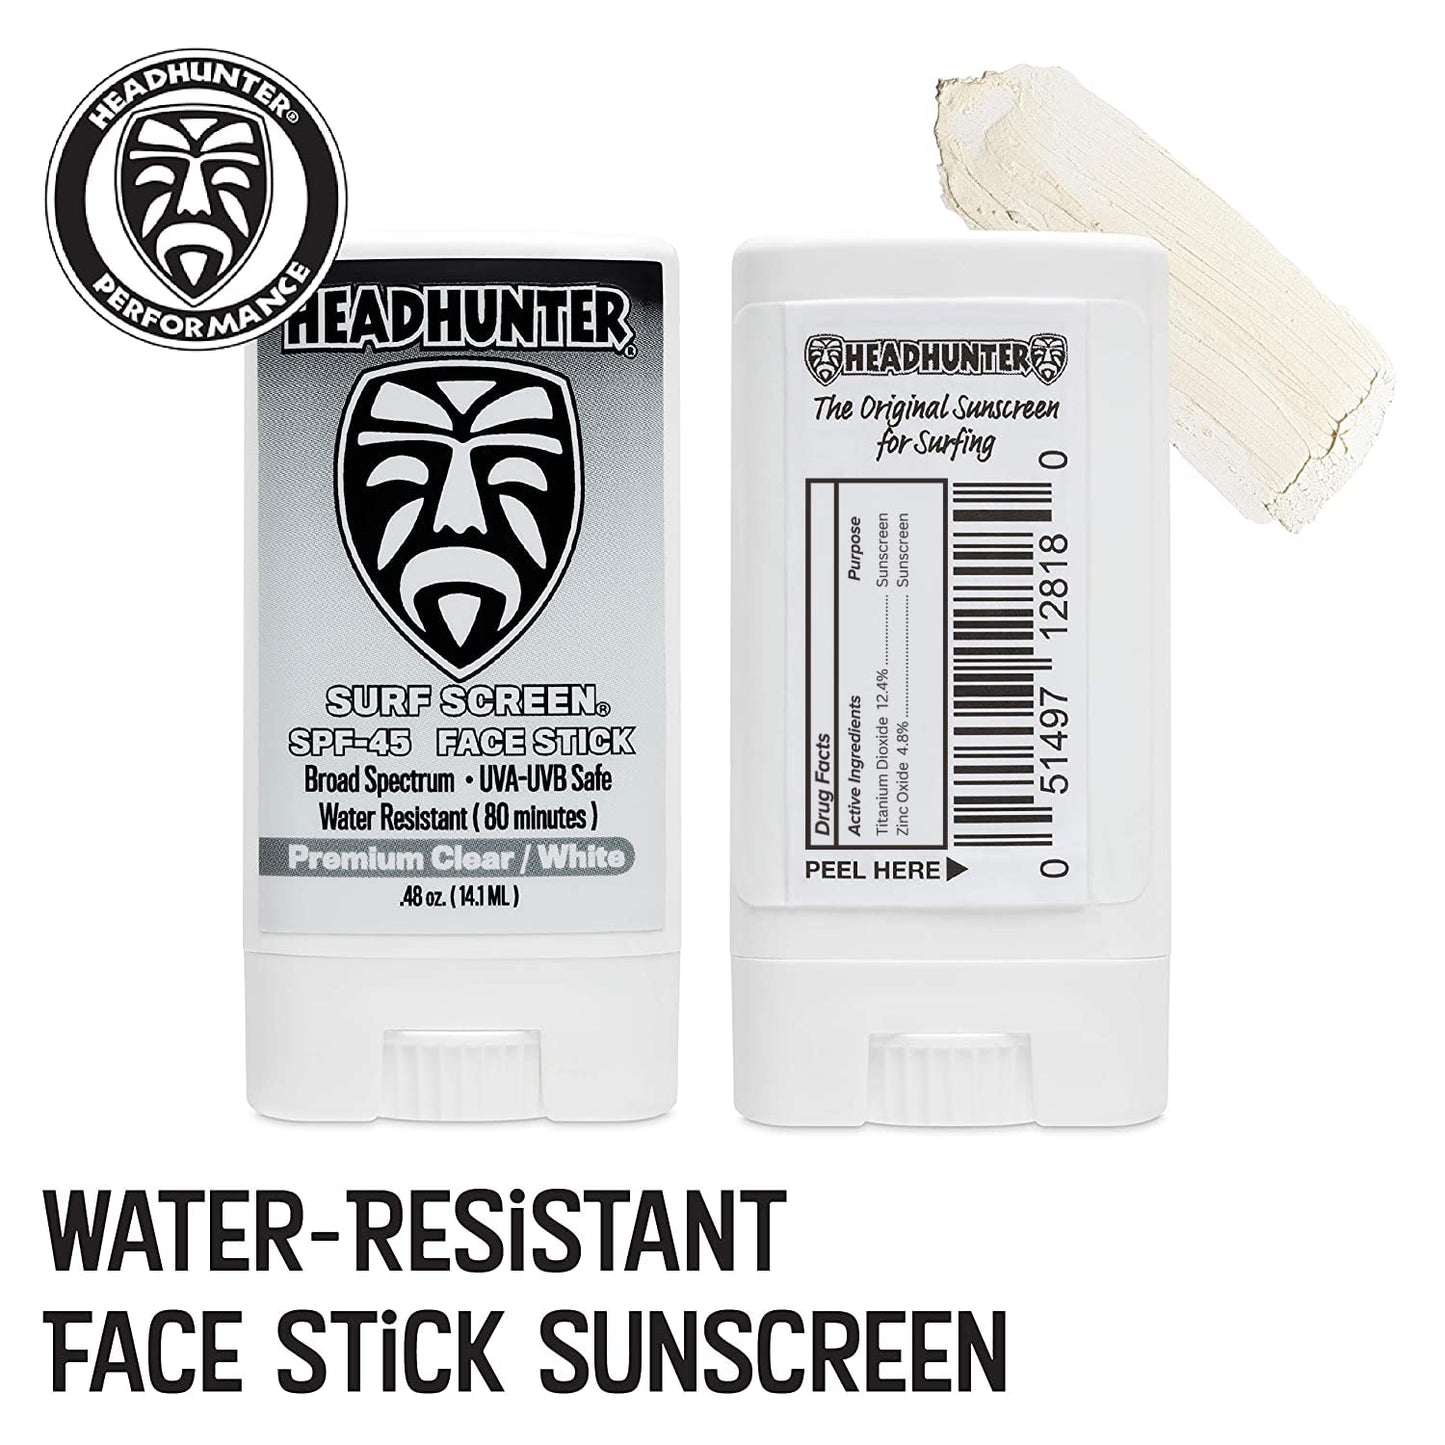 SPF 45 Mineral Sunscreen Face Stick – Clear / White  (HWT)